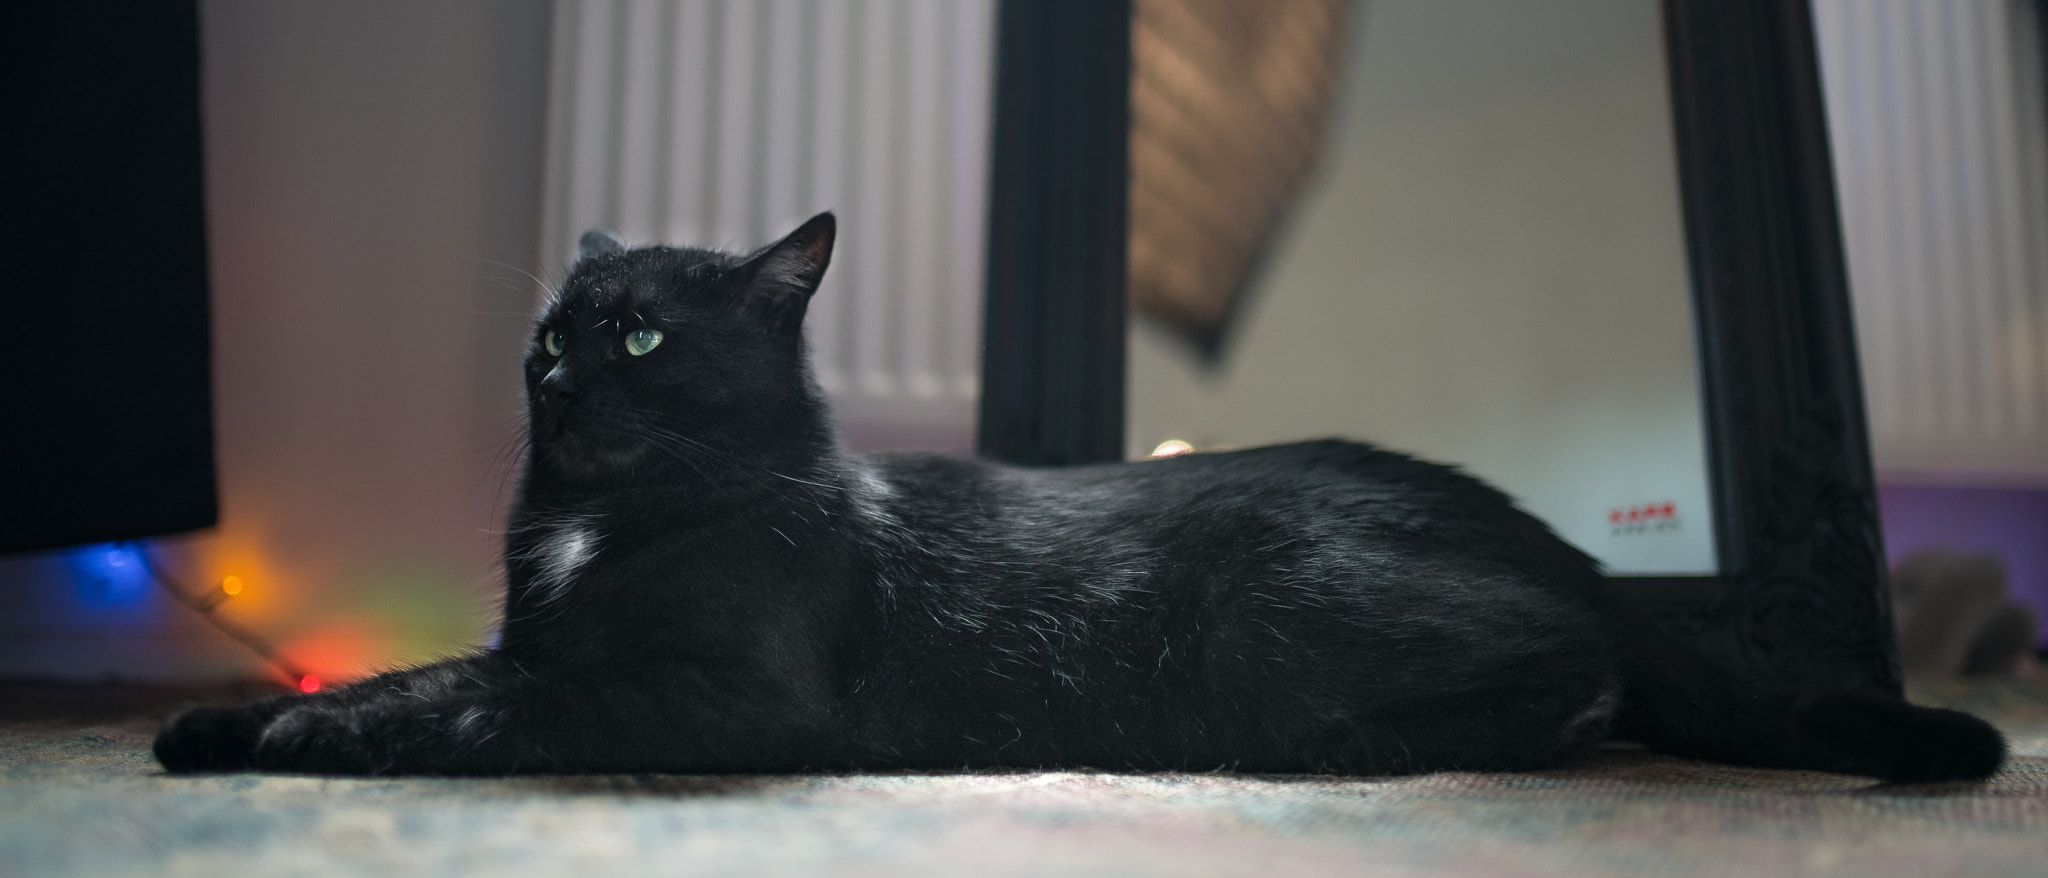 Sony a99 II sample photo. Atelier6 cat photography